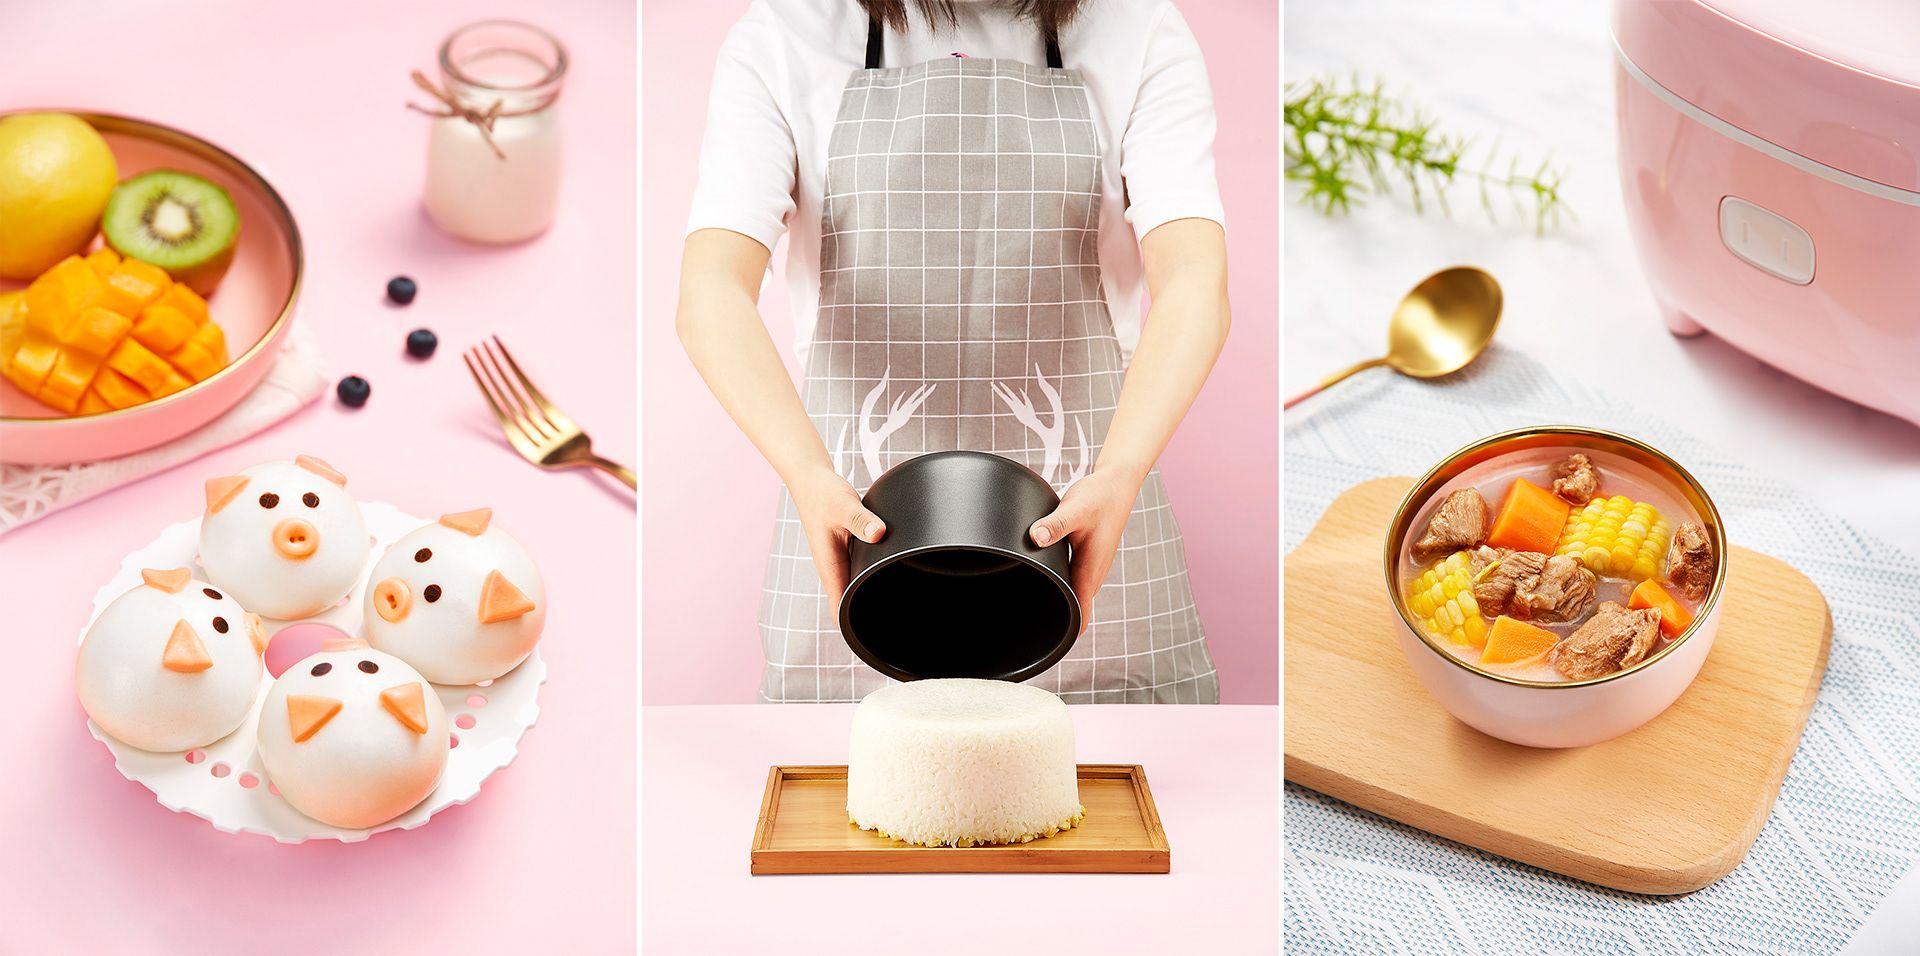 Small Pink Pig Rice Cooker on Behance.jpg